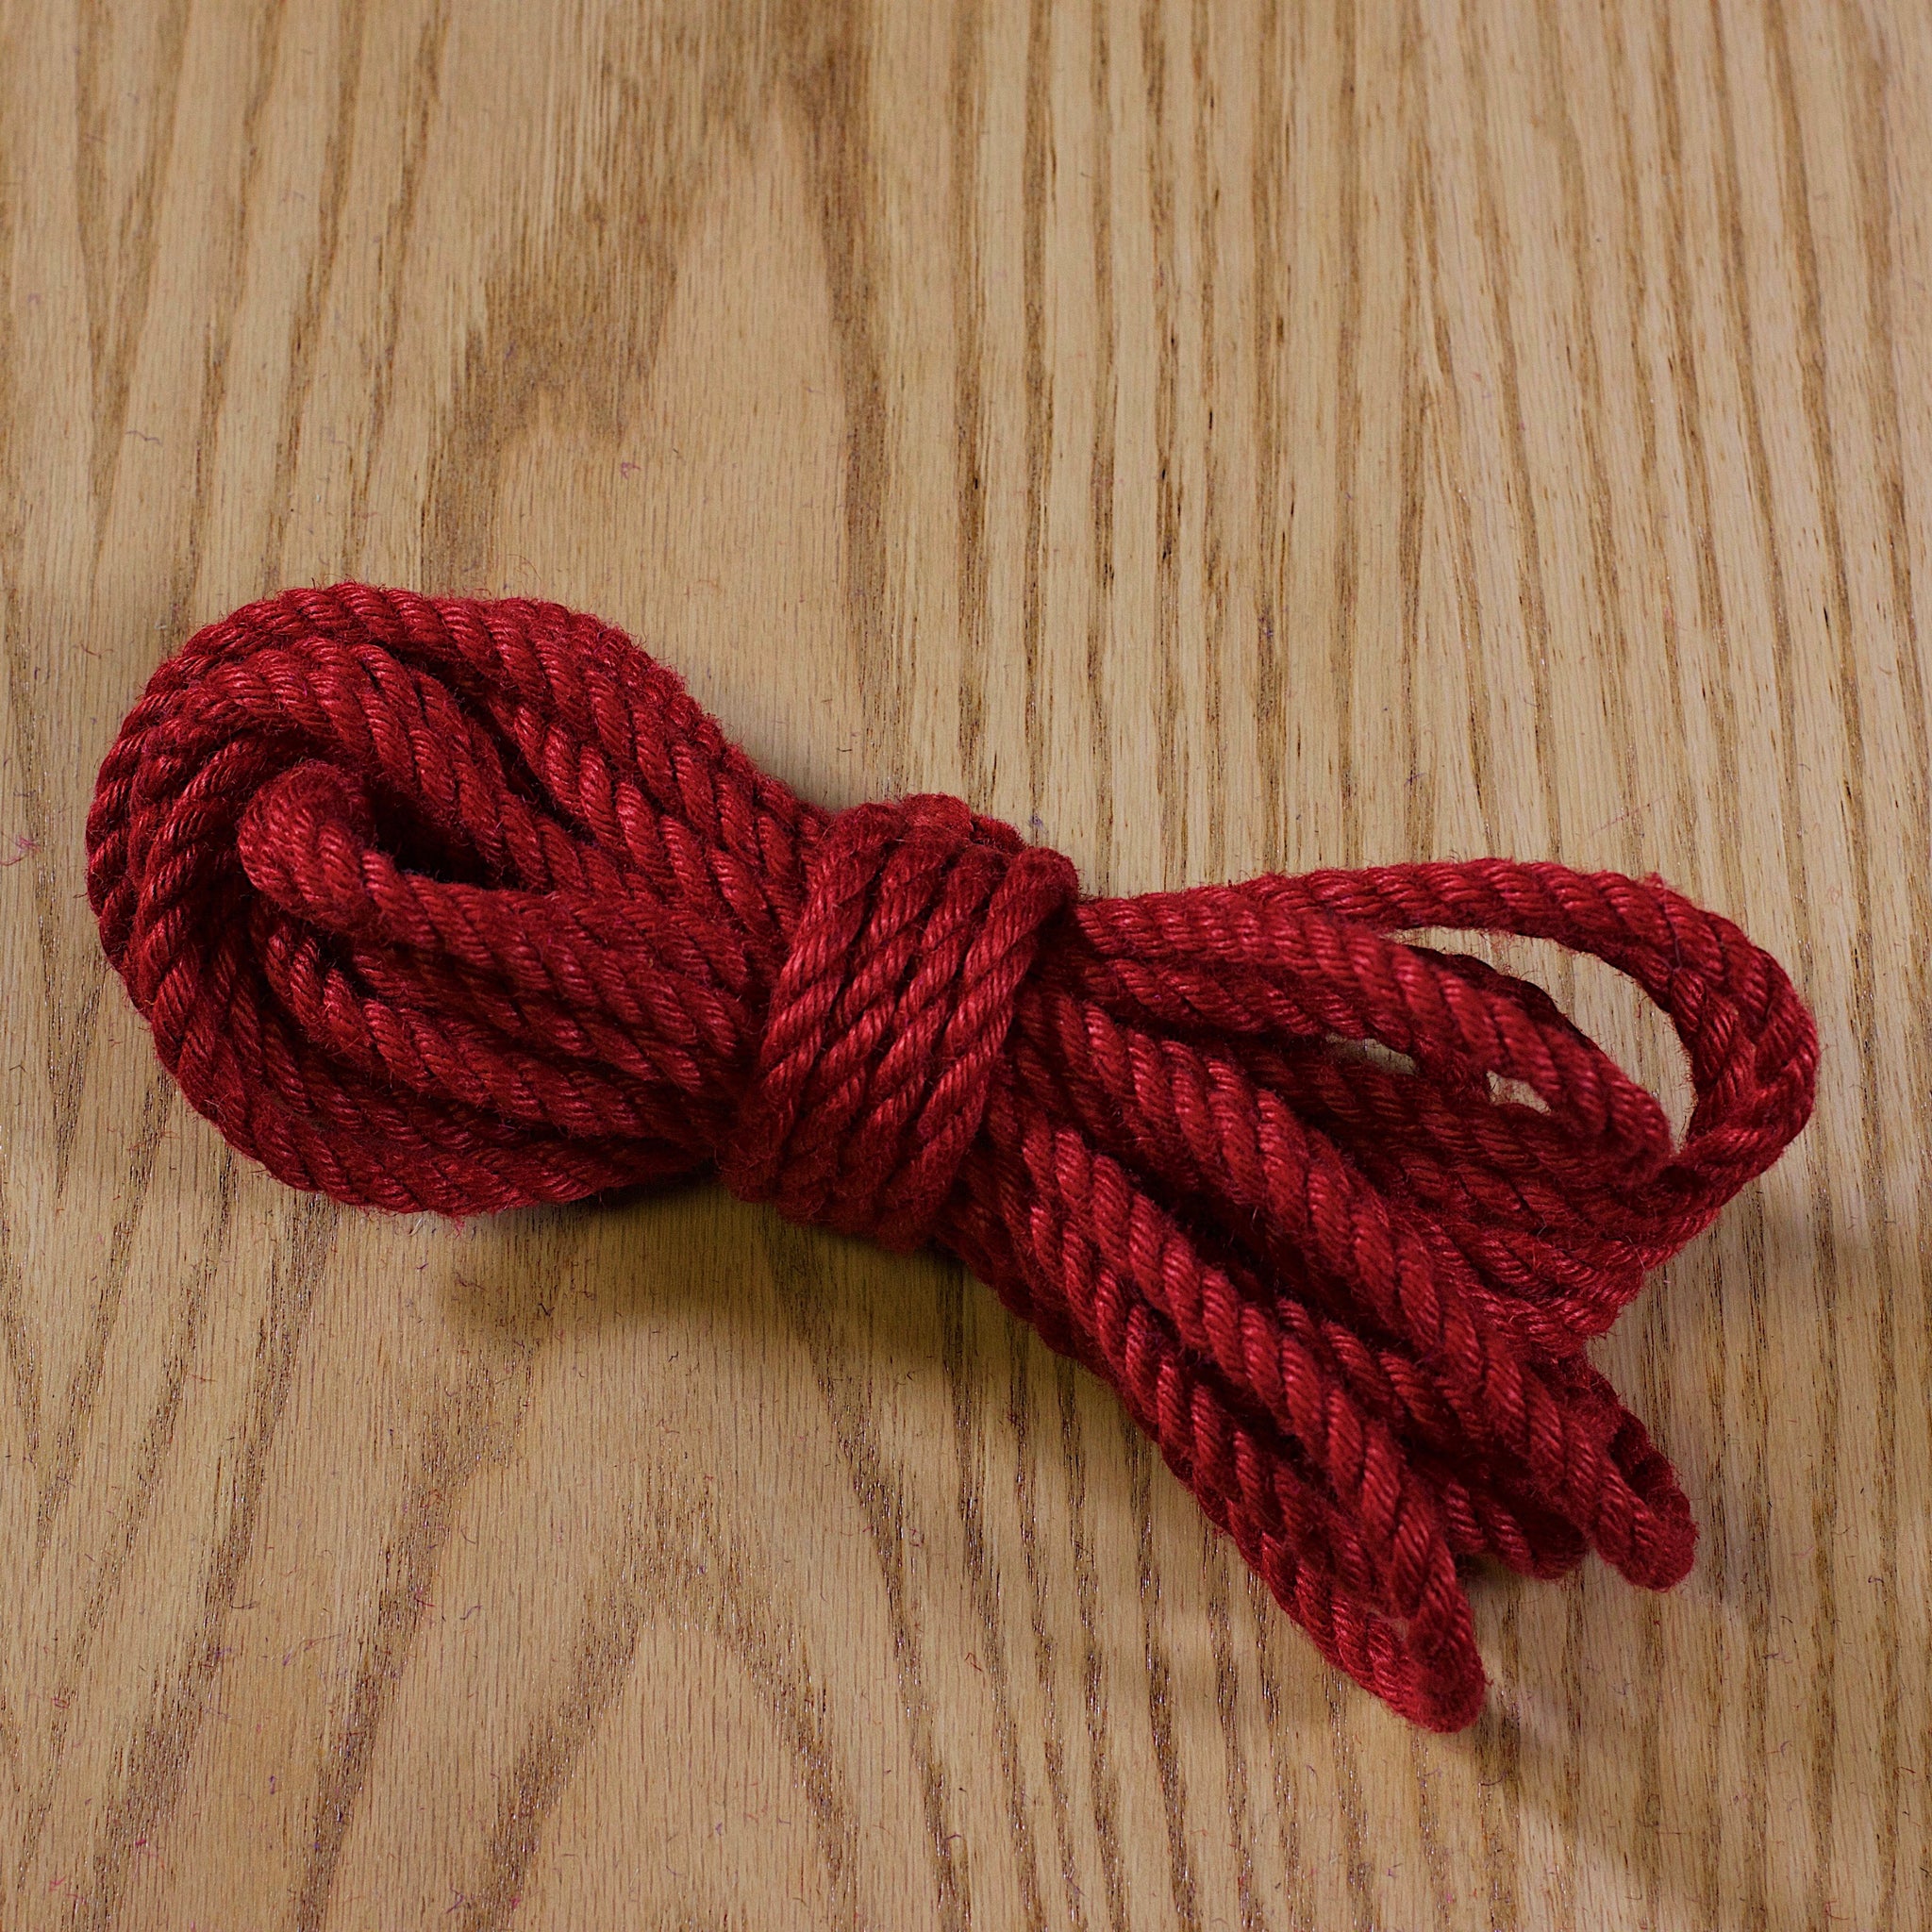 Ogawa Jute Rope, Treated (1 Rope) - Red - Tensionmtl